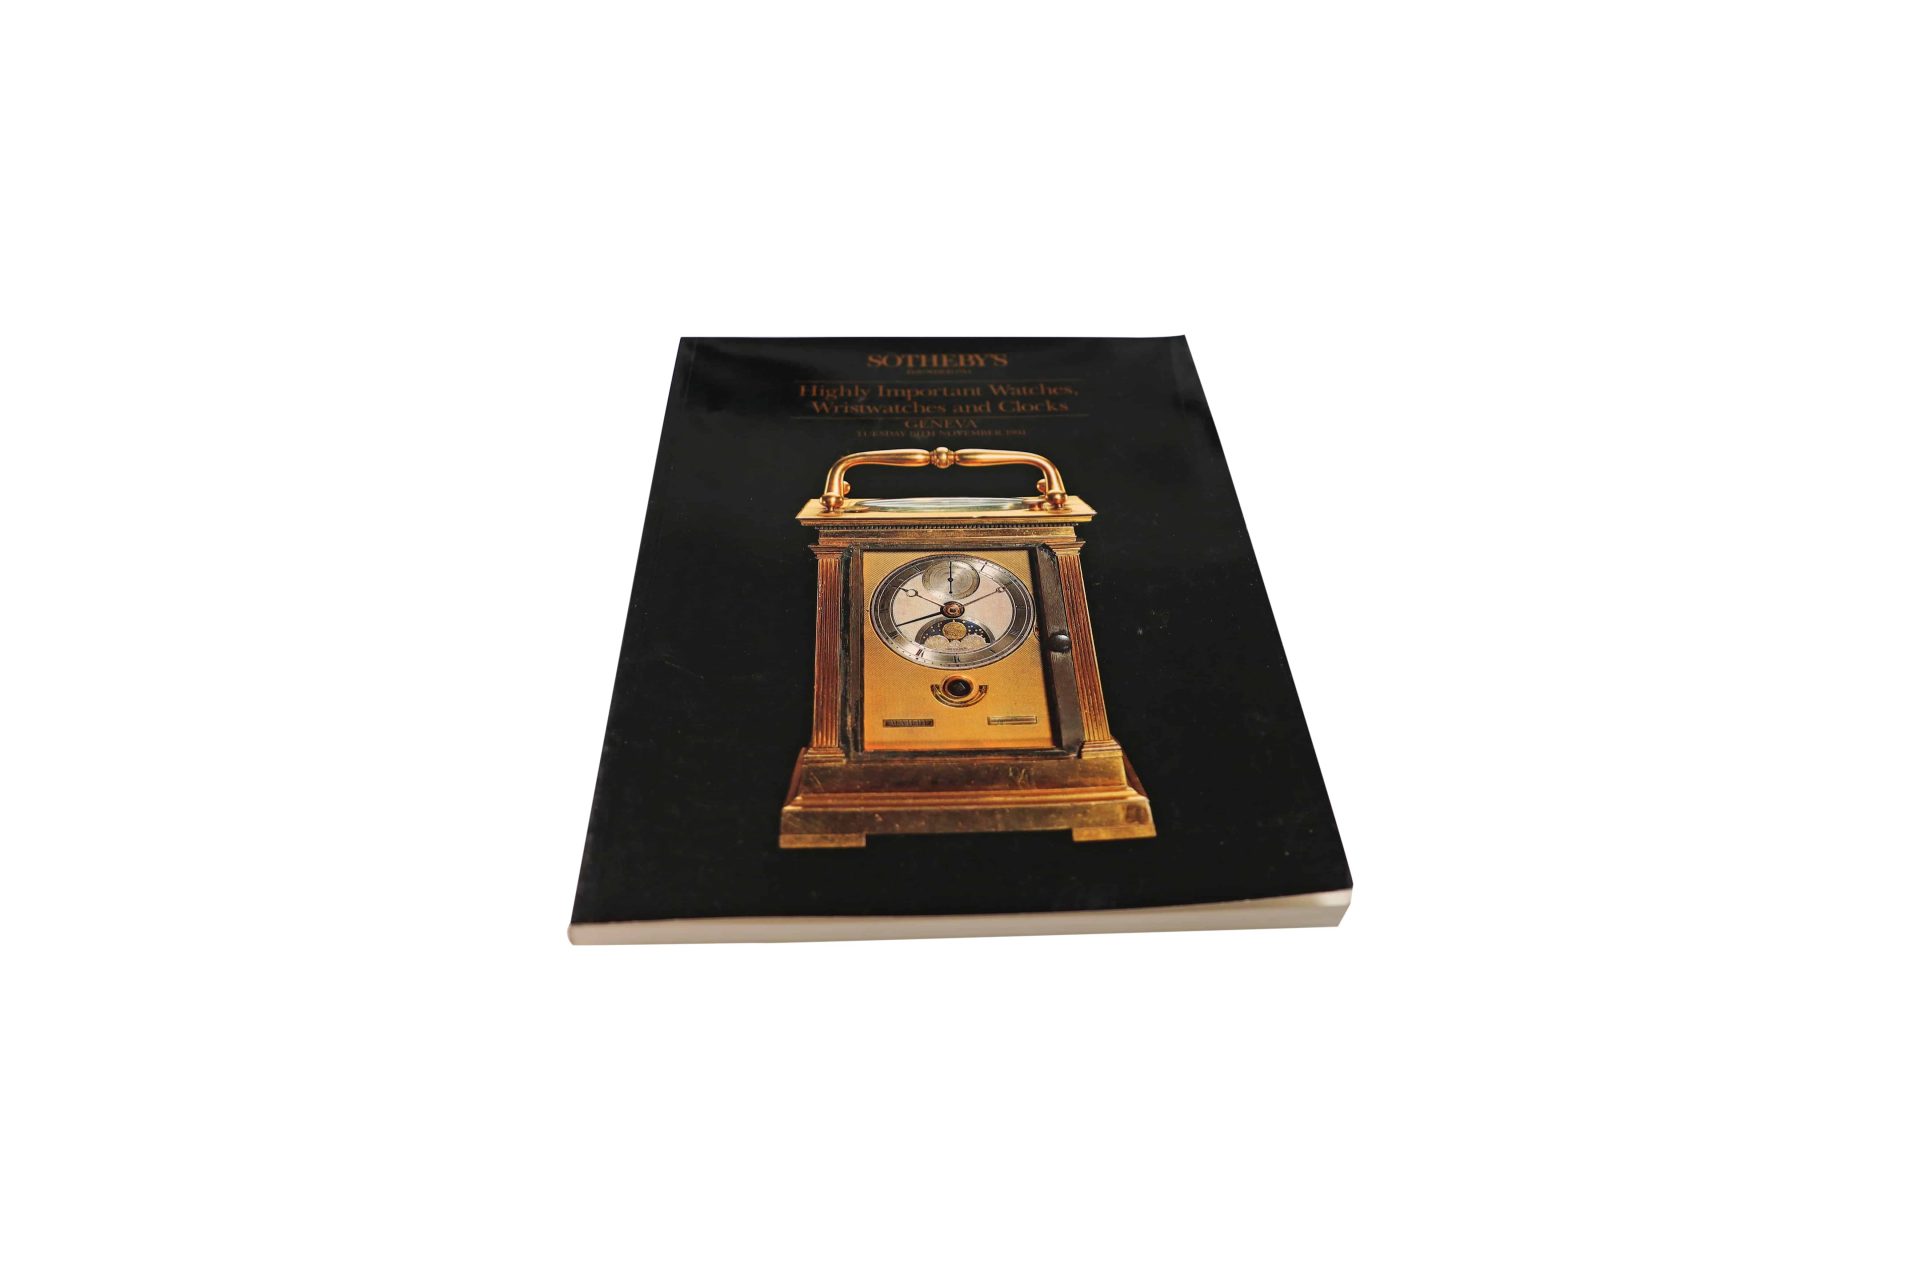 Sotheby's Highly Important Watches, Wristwatches And Clocks Geneva Auction Catalog - Rare Watch Parts